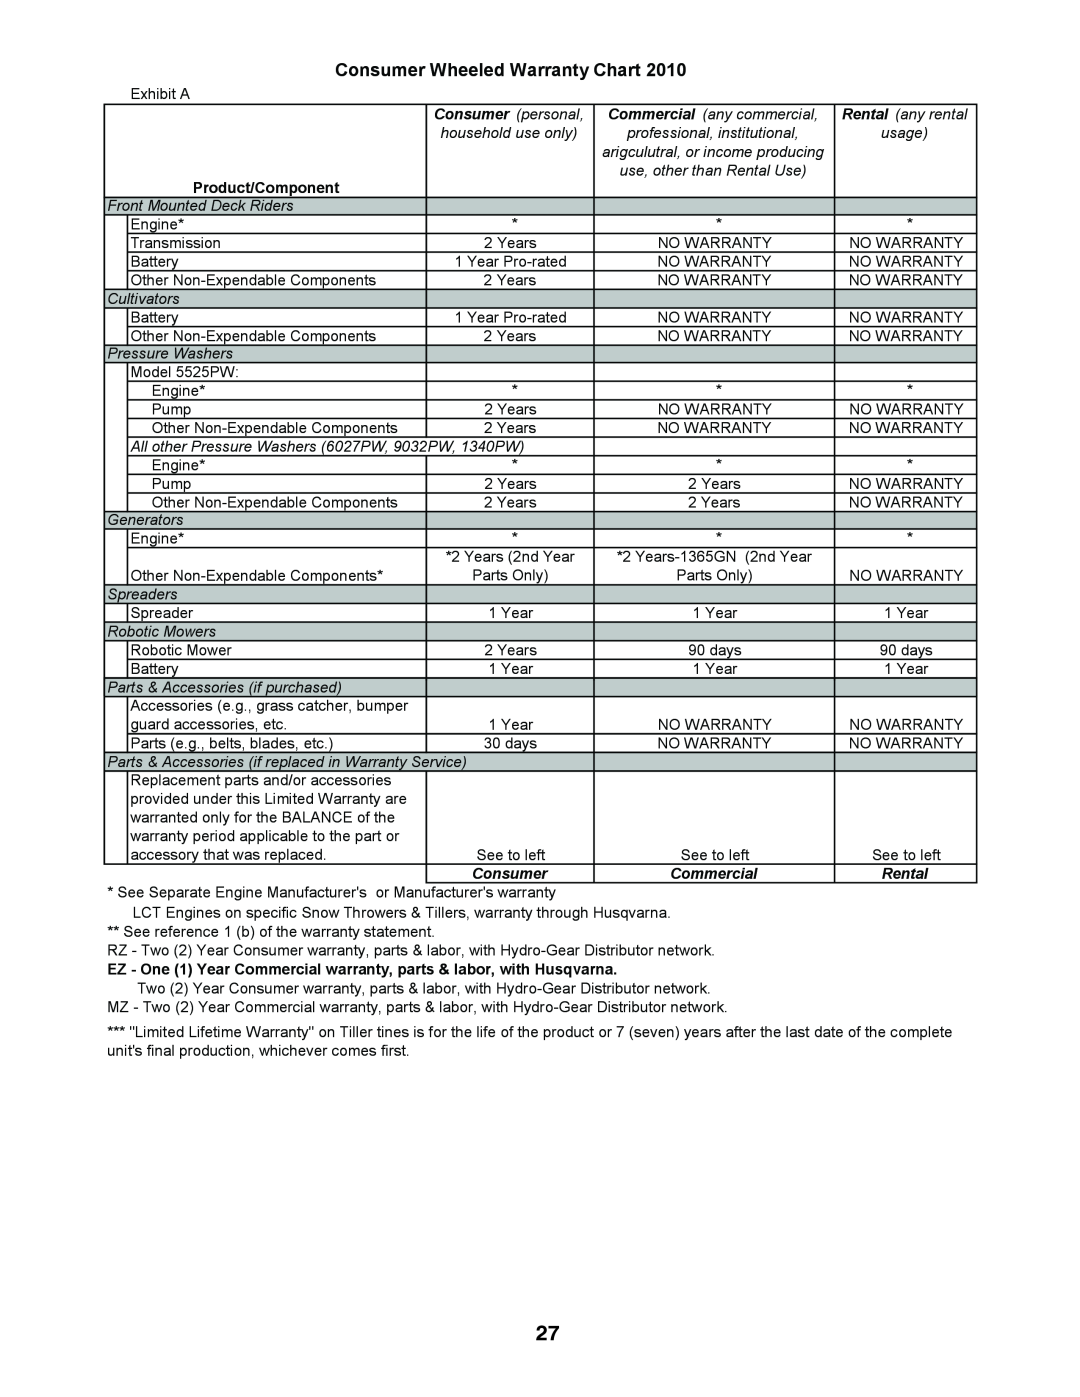 Husqvarna FT900 owner manual Consumer Wheeled Warranty Chart, Product/Component 